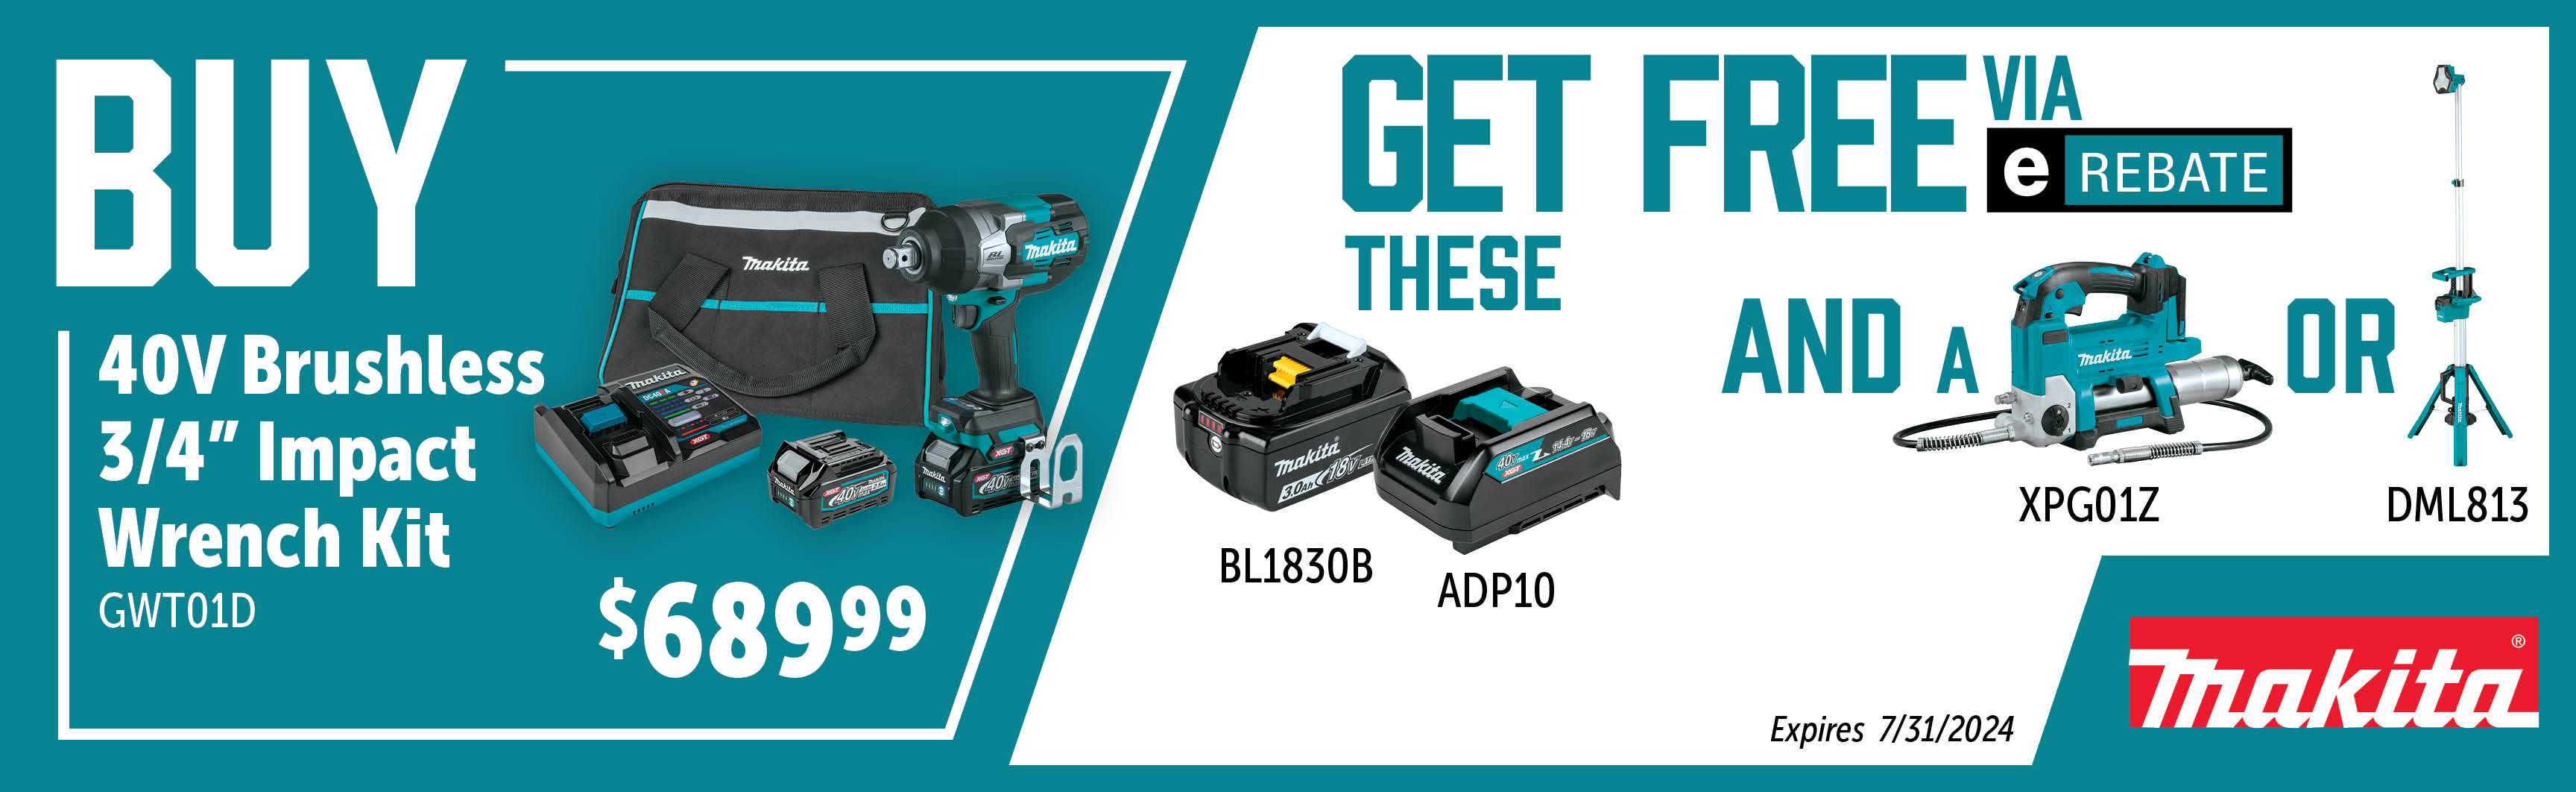 Makita May - July: Buy a GWT01D and Get Your Choice of a Free XPG01Z, BL1830B and ADP10 OR DML813, BL1830B, and ADP10 Via E-Rebate